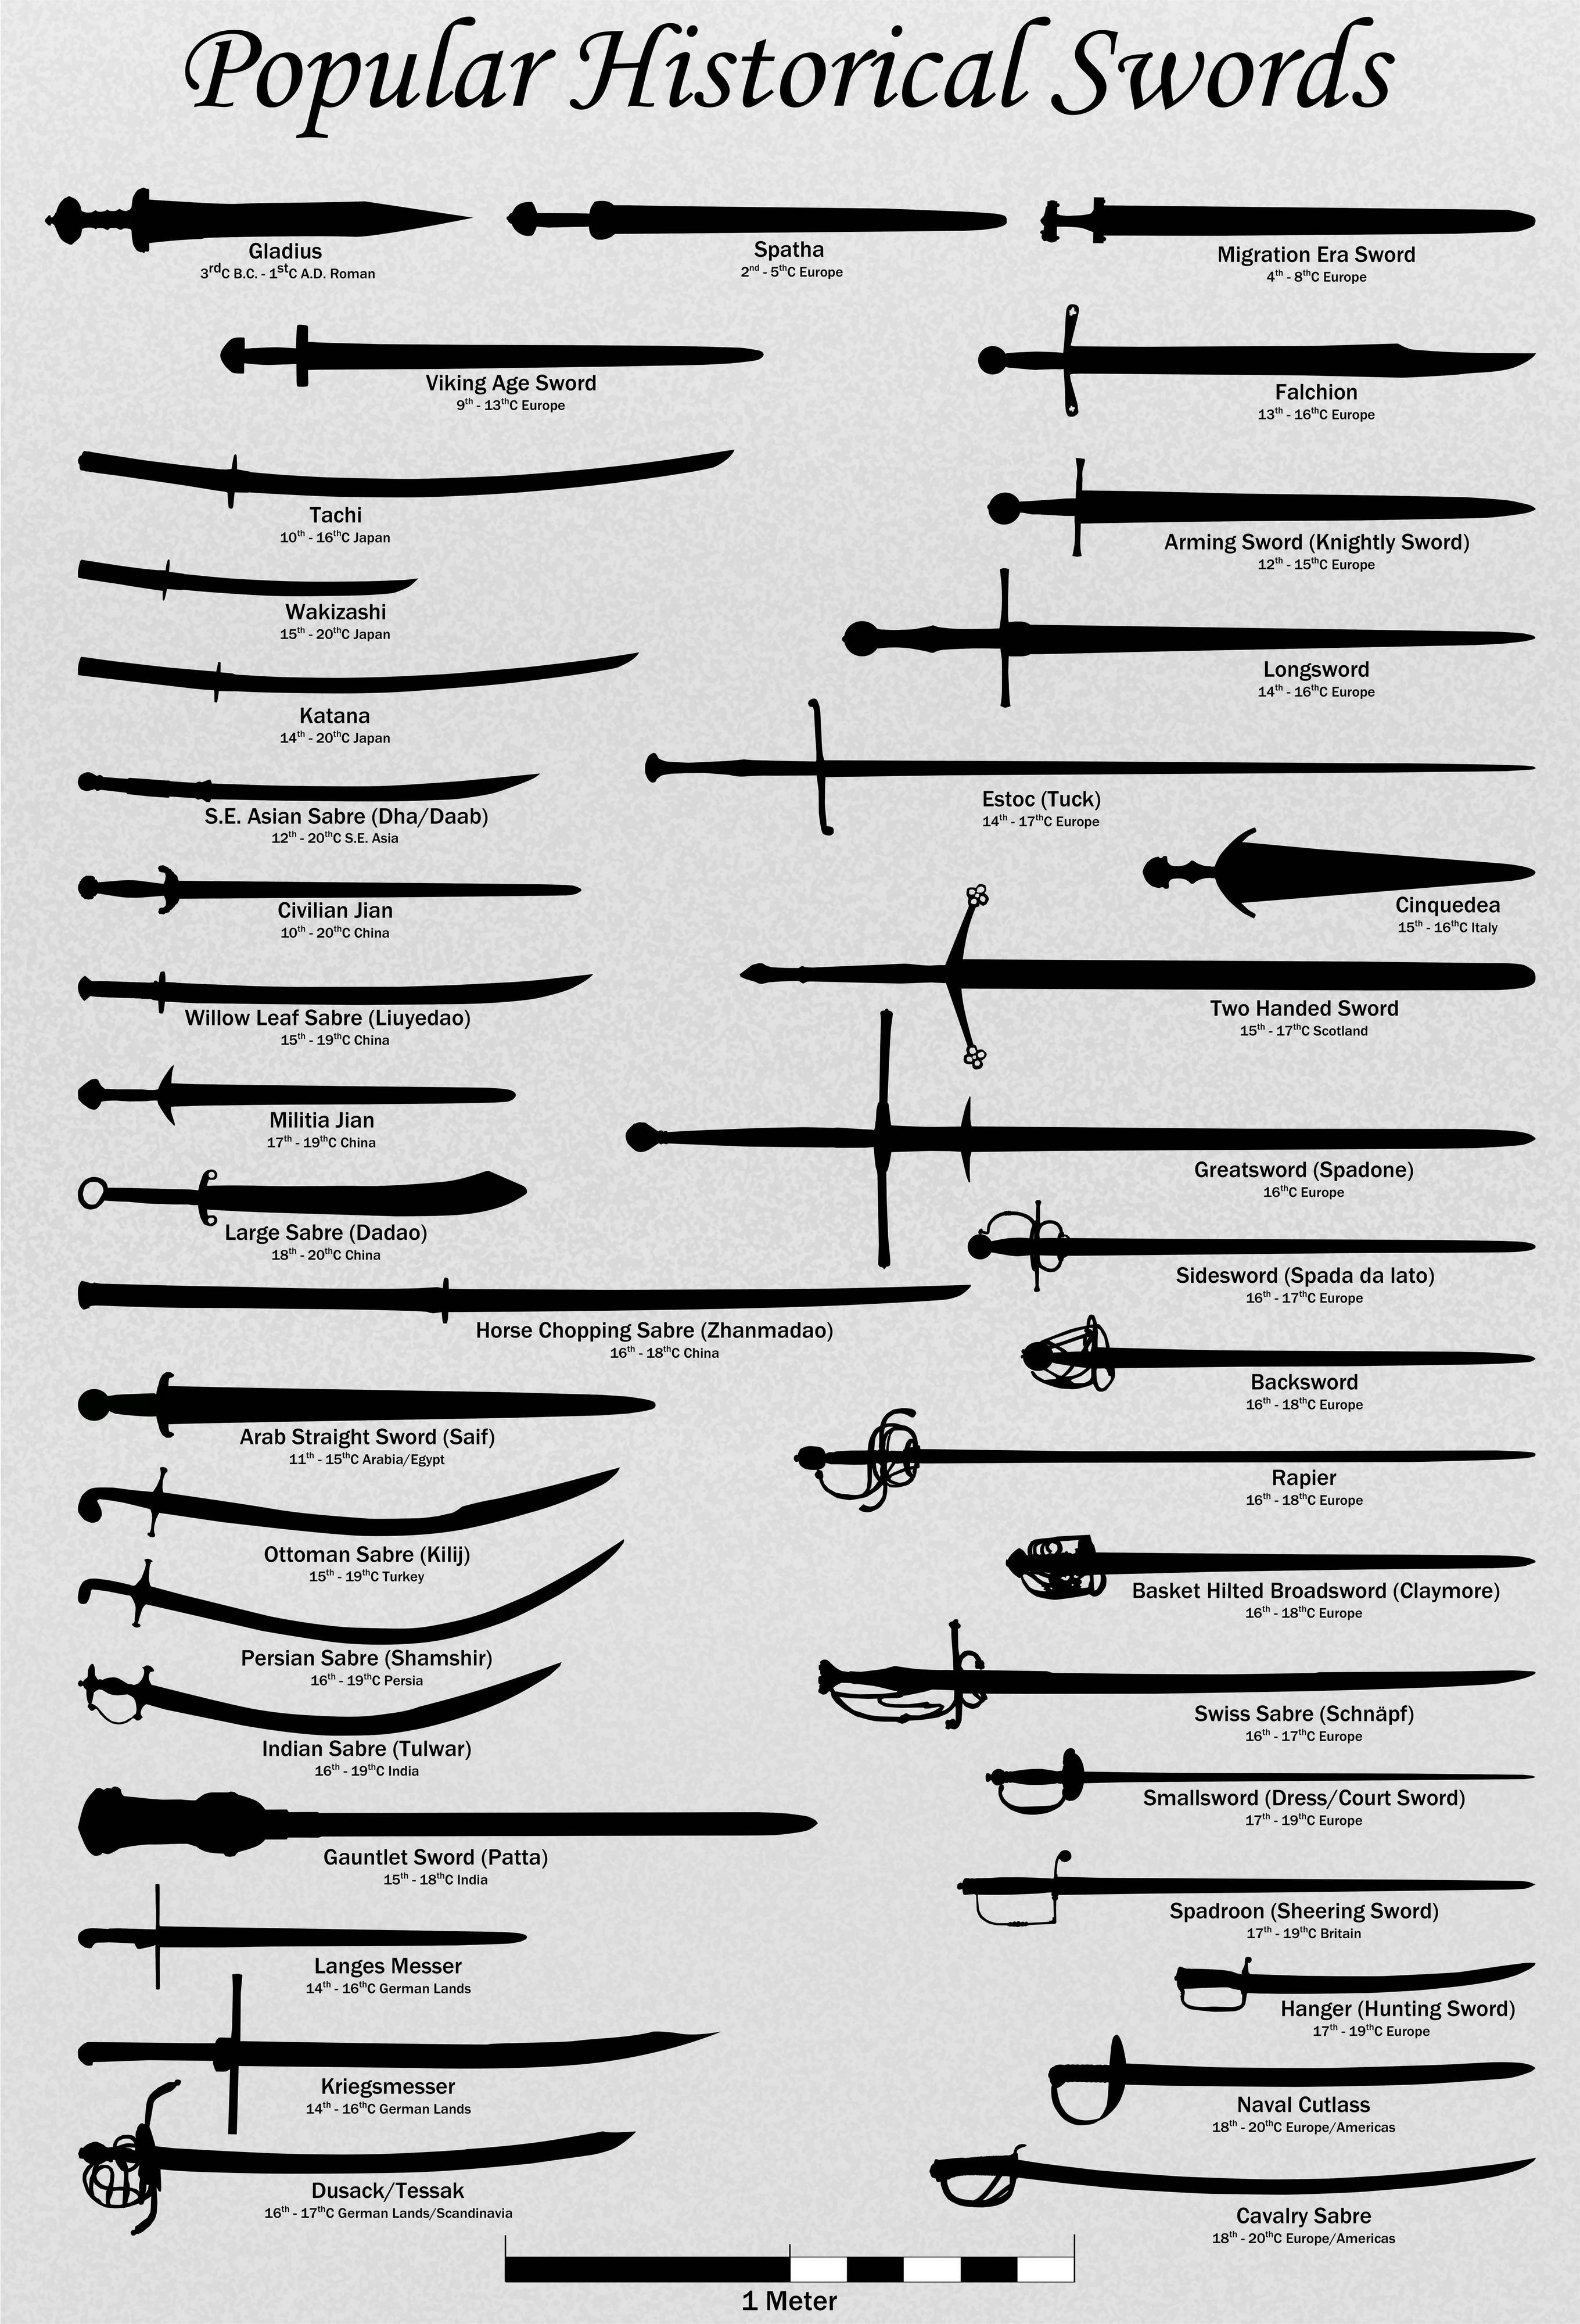 The swords have names.